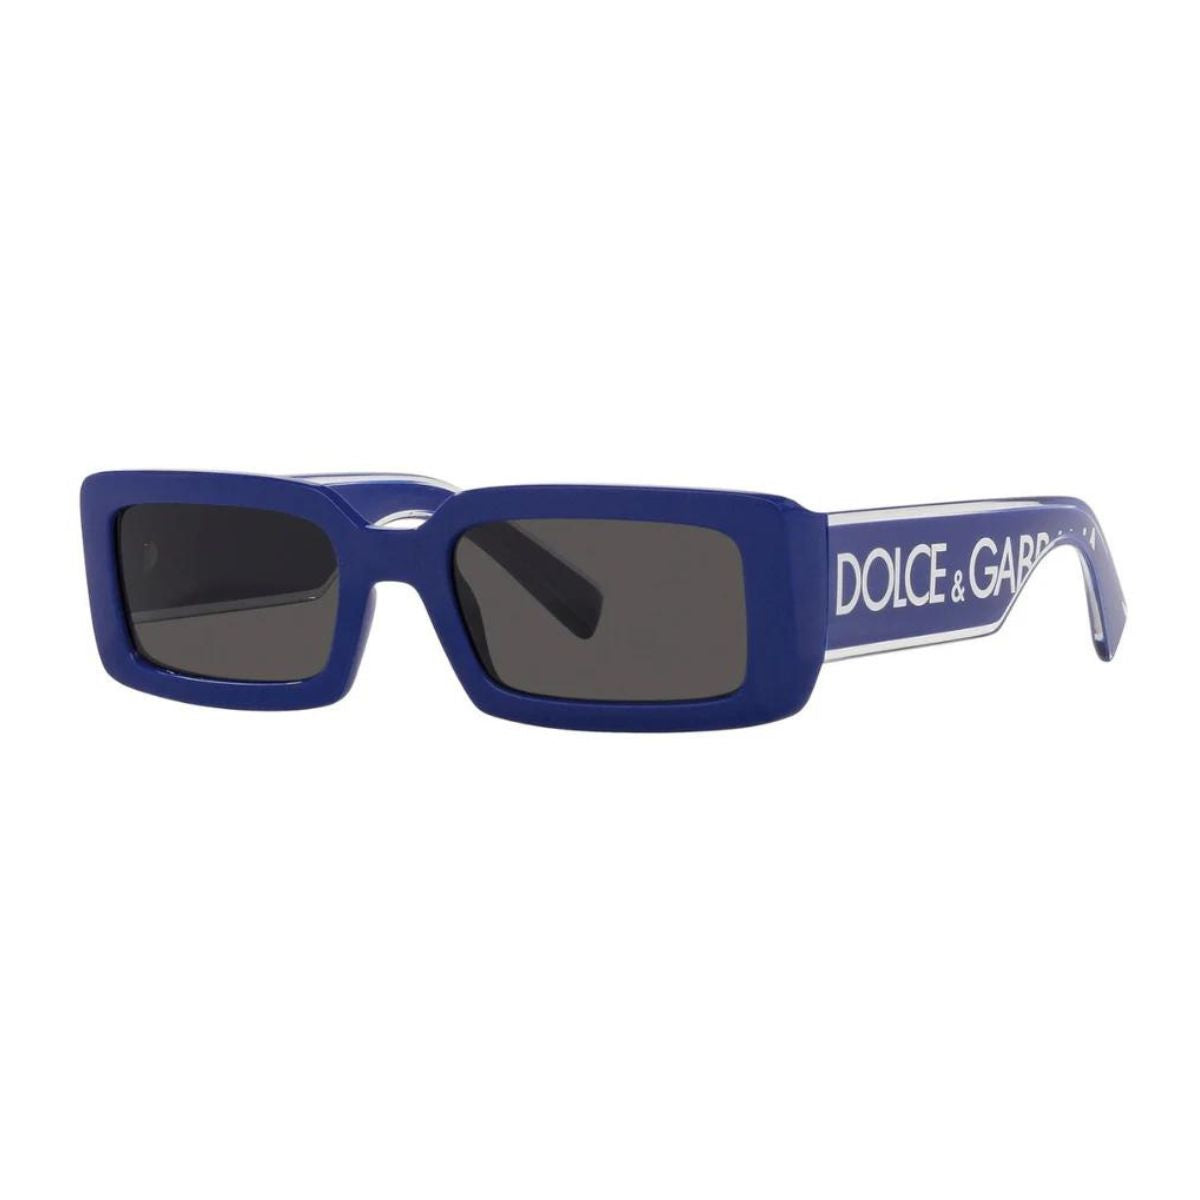 "Blue and white Dolce & Gabbana DG6187 3094/87 sunglasses with UV protection, rectangle frame, for men and women.
